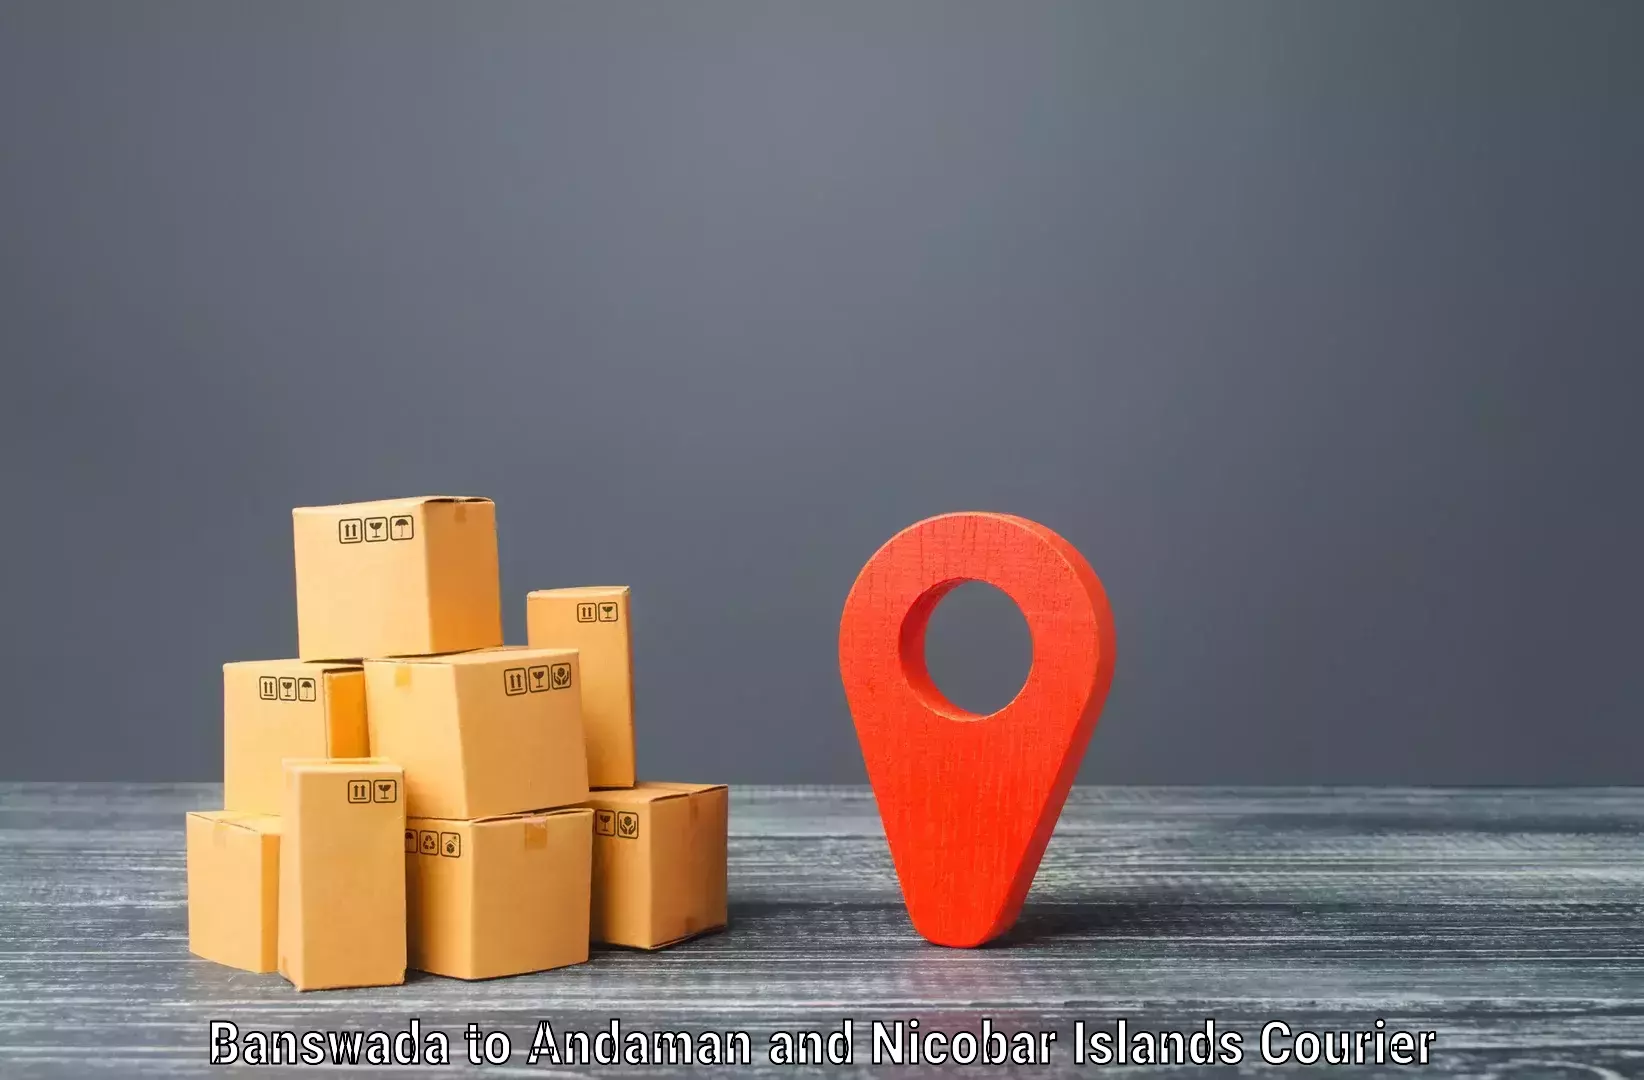 Customizable delivery plans in Banswada to North And Middle Andaman